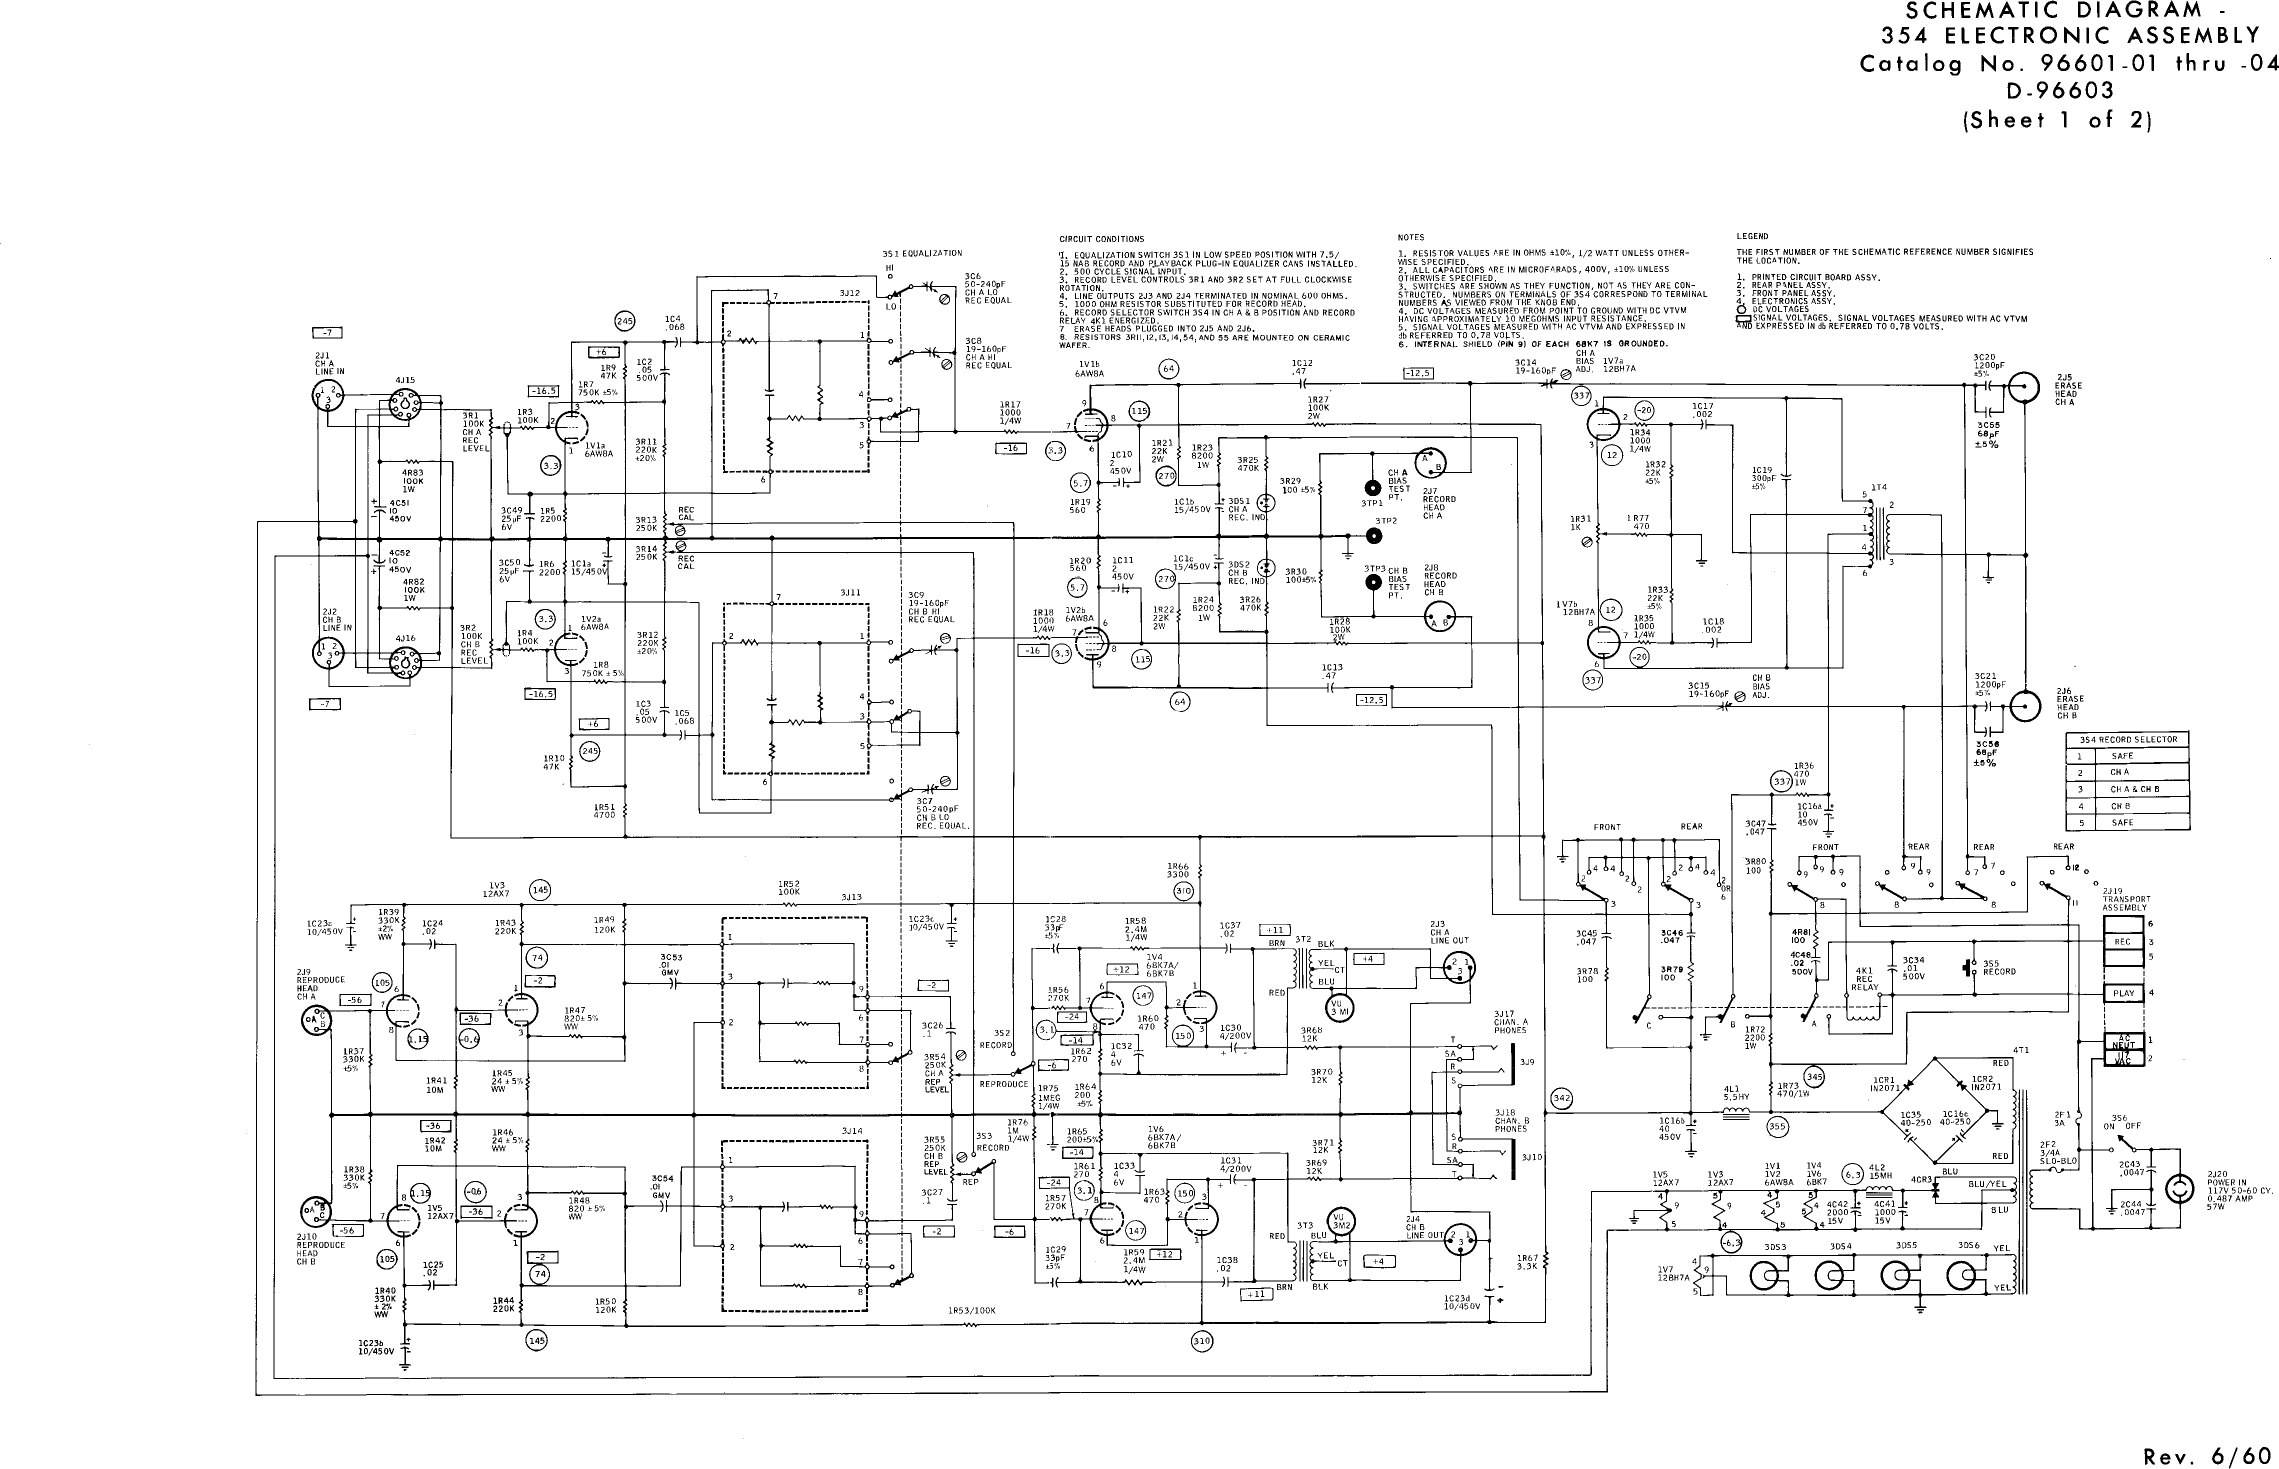 Page 4 of 5 - Ampex 354 Electronics